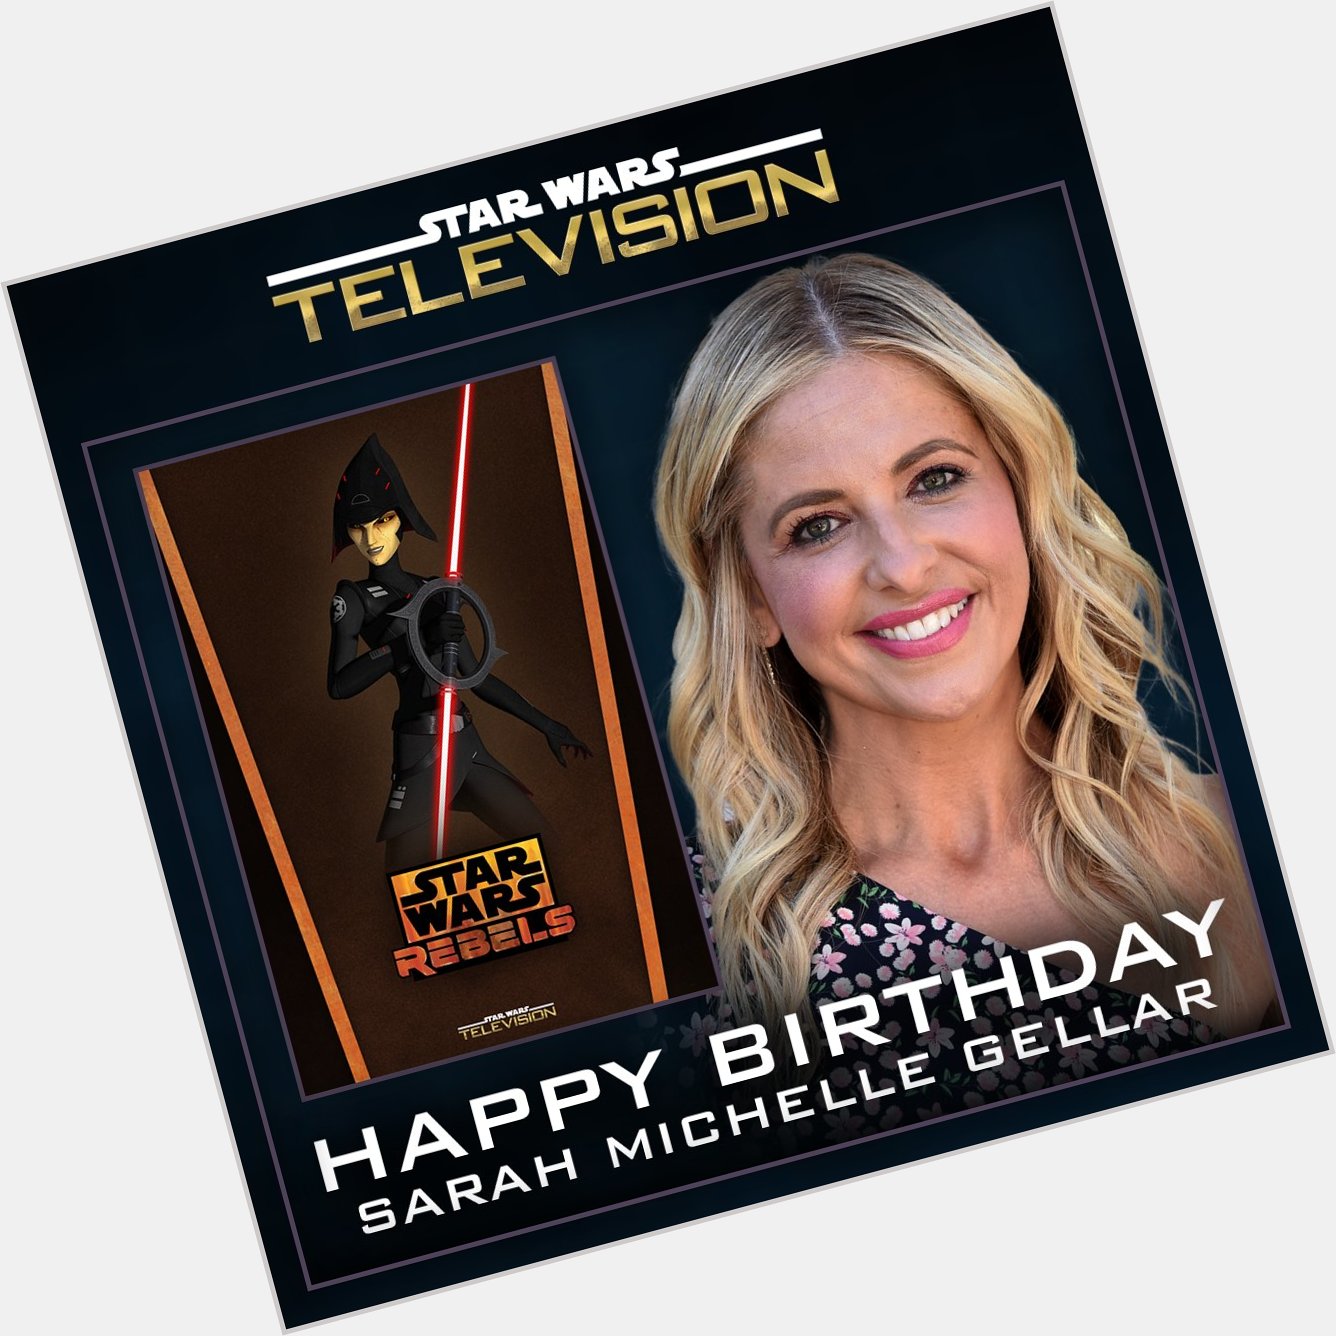 Happy birthday to Sarah Michelle Gellar, who voiced the Seventh Sister in   